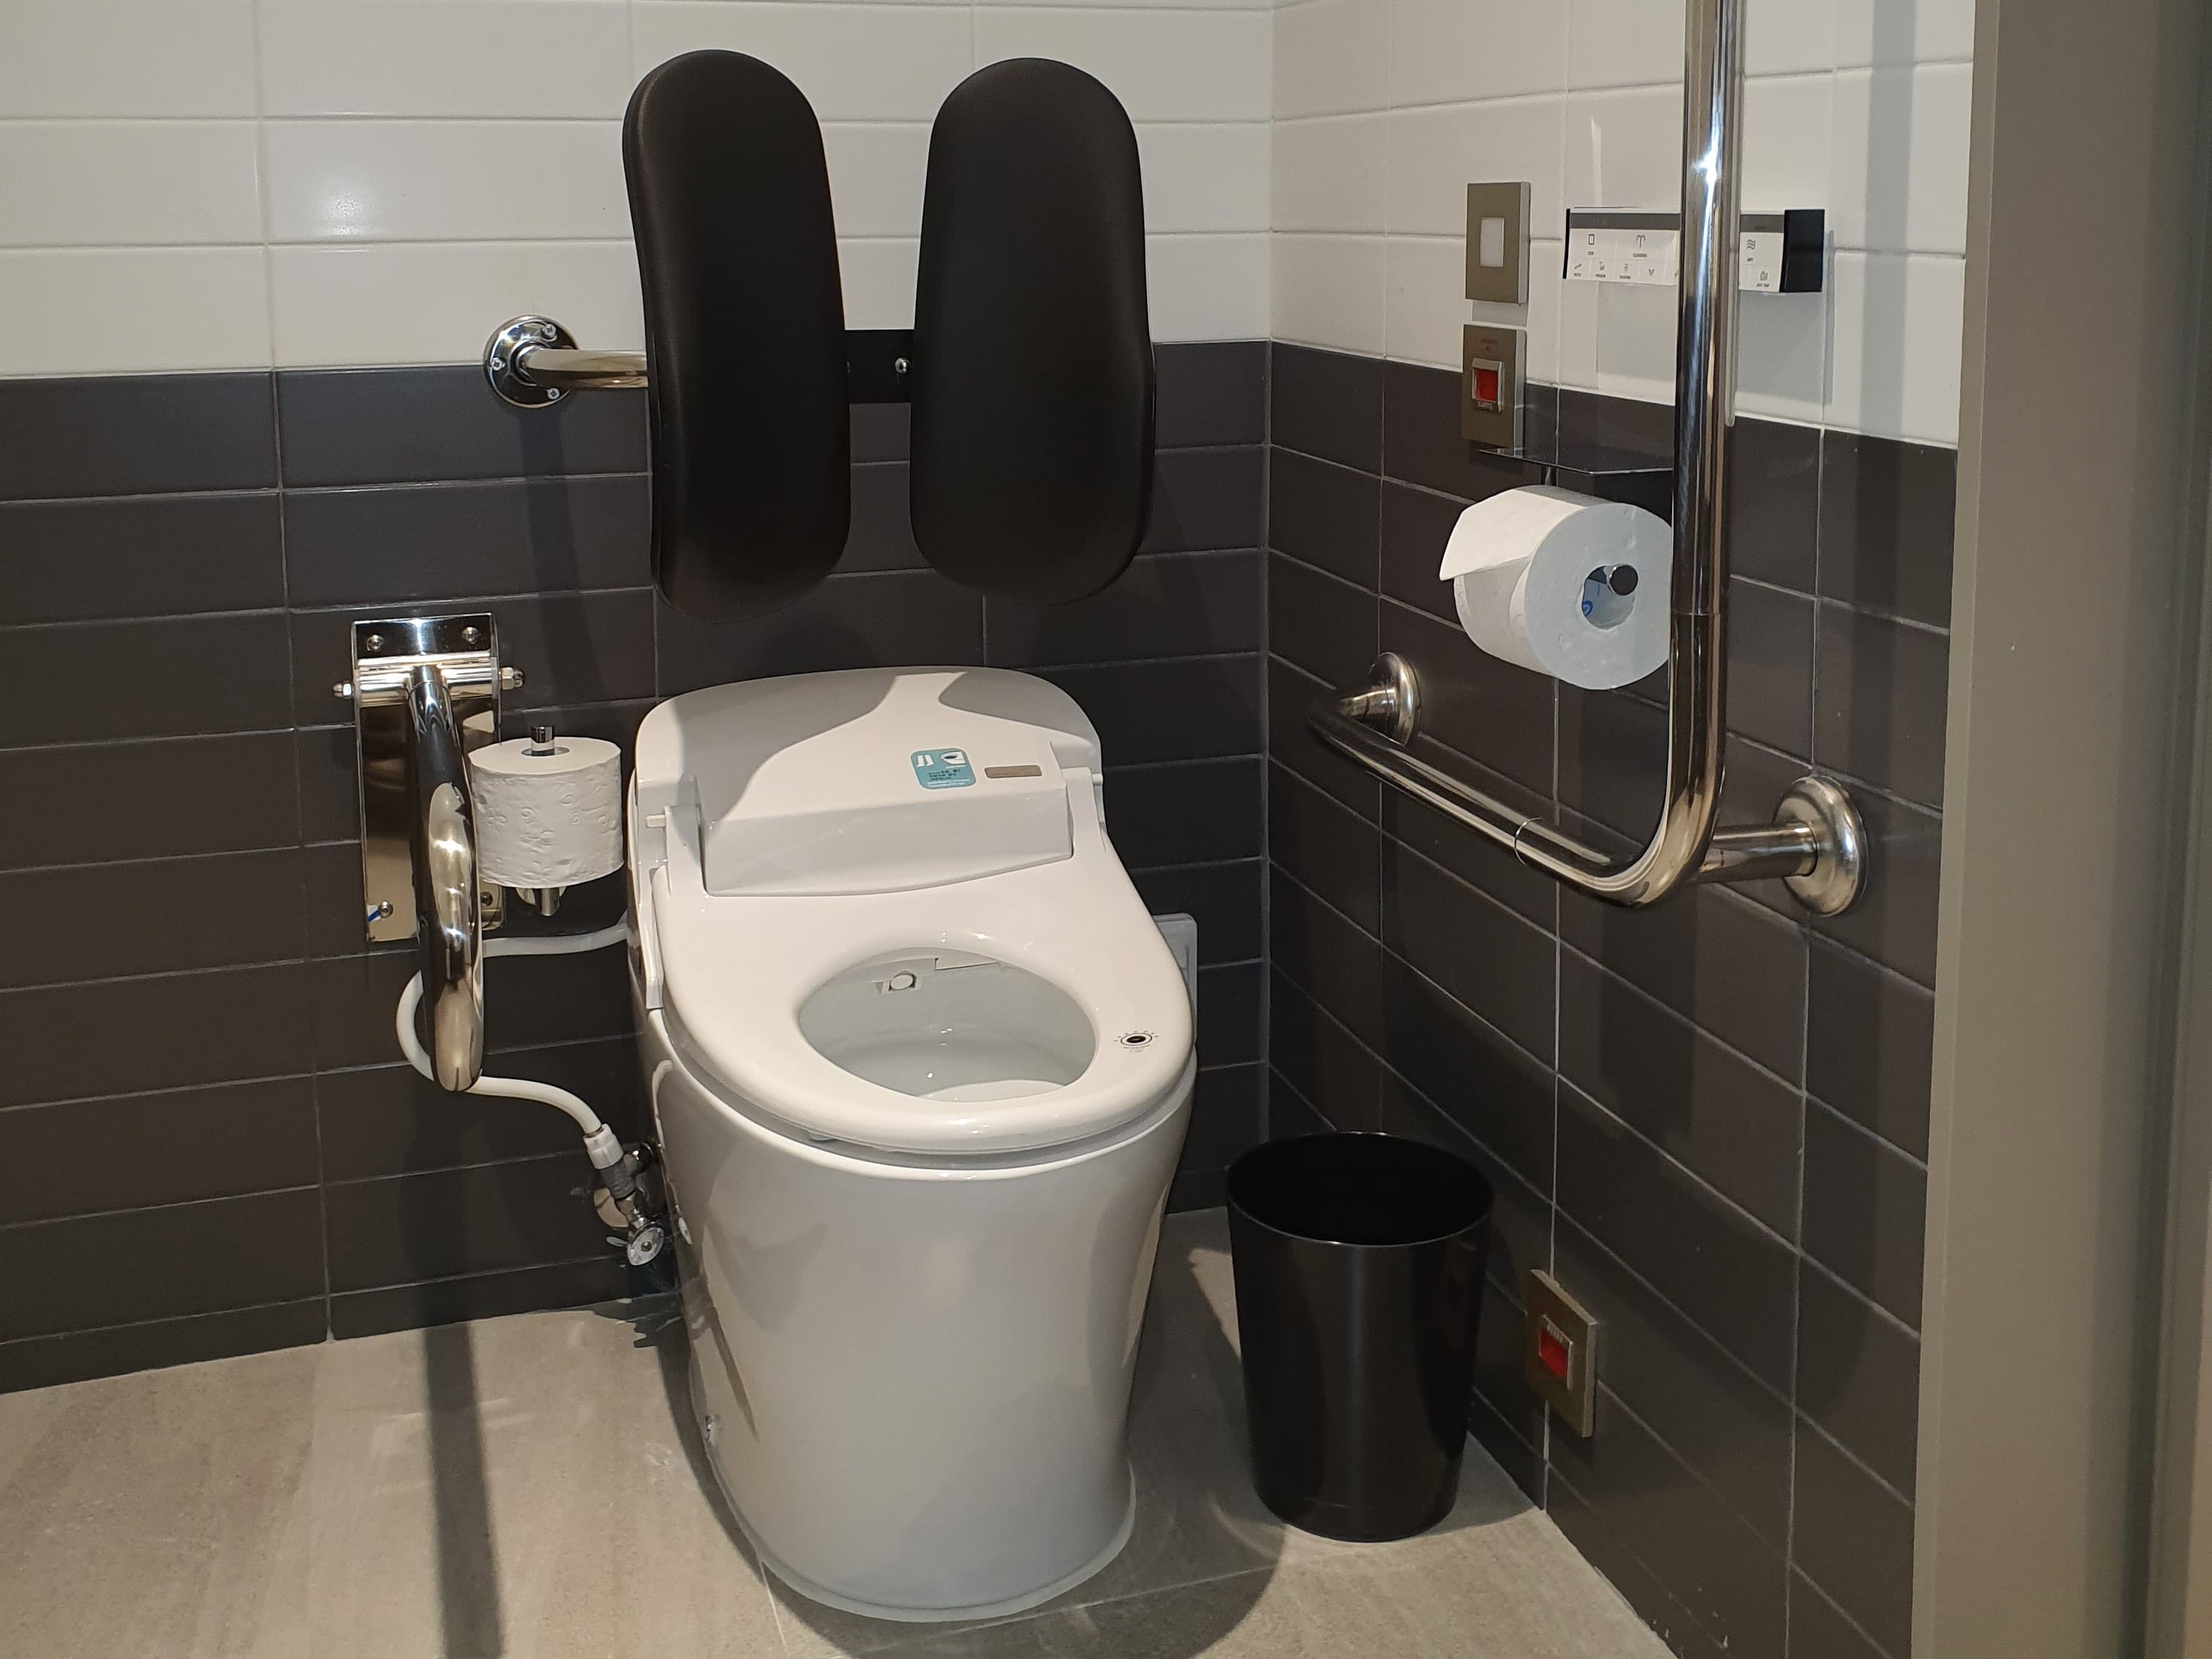 Bathroom0 : Toilet equipped with a backrest and grab bars